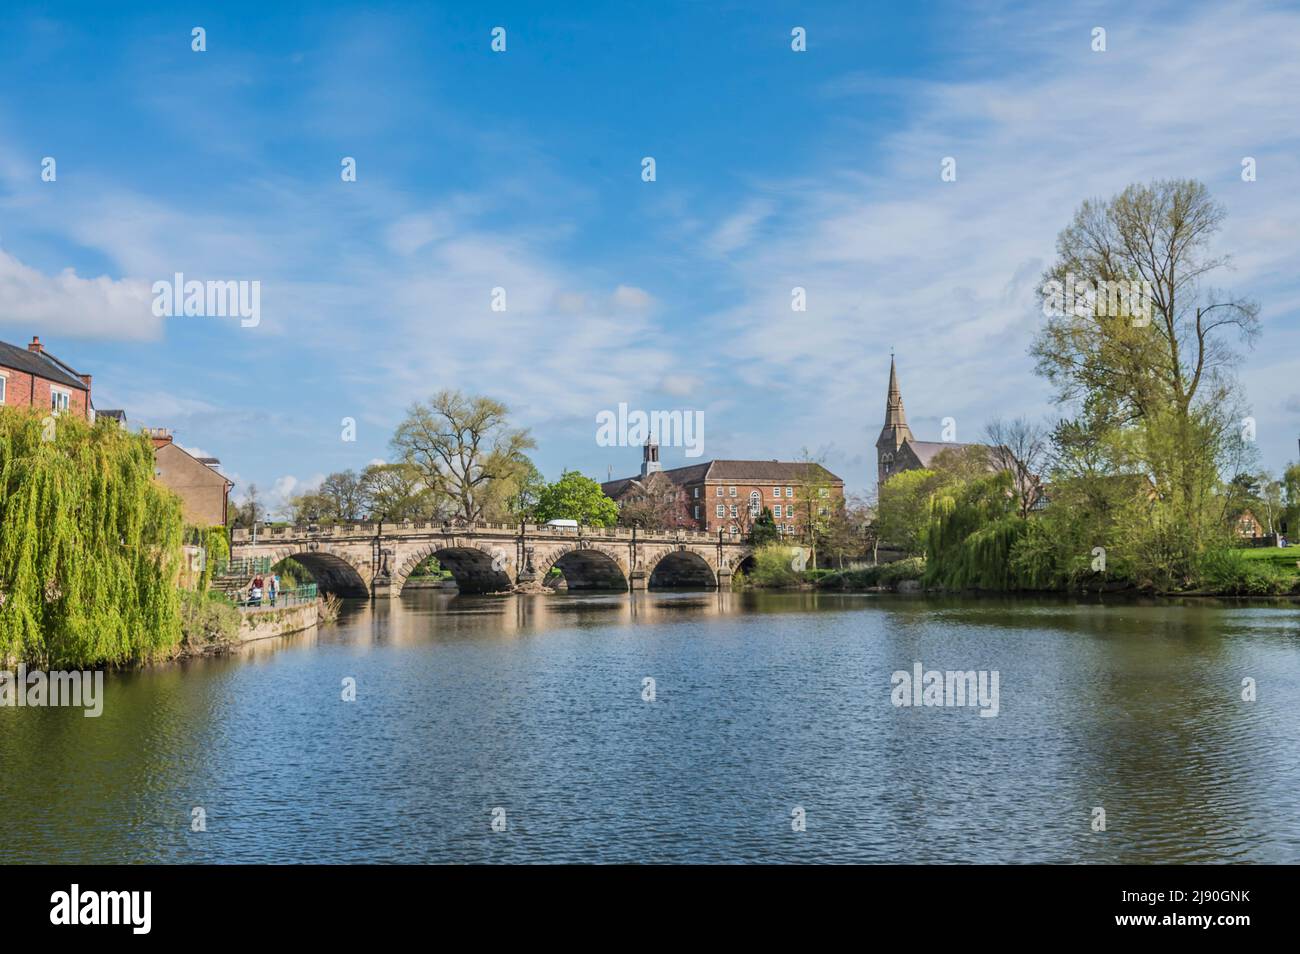 Colourful riverscape landscapes at the English Bridge on the Loop of the River Seven in Shrewsbury Stock Photo